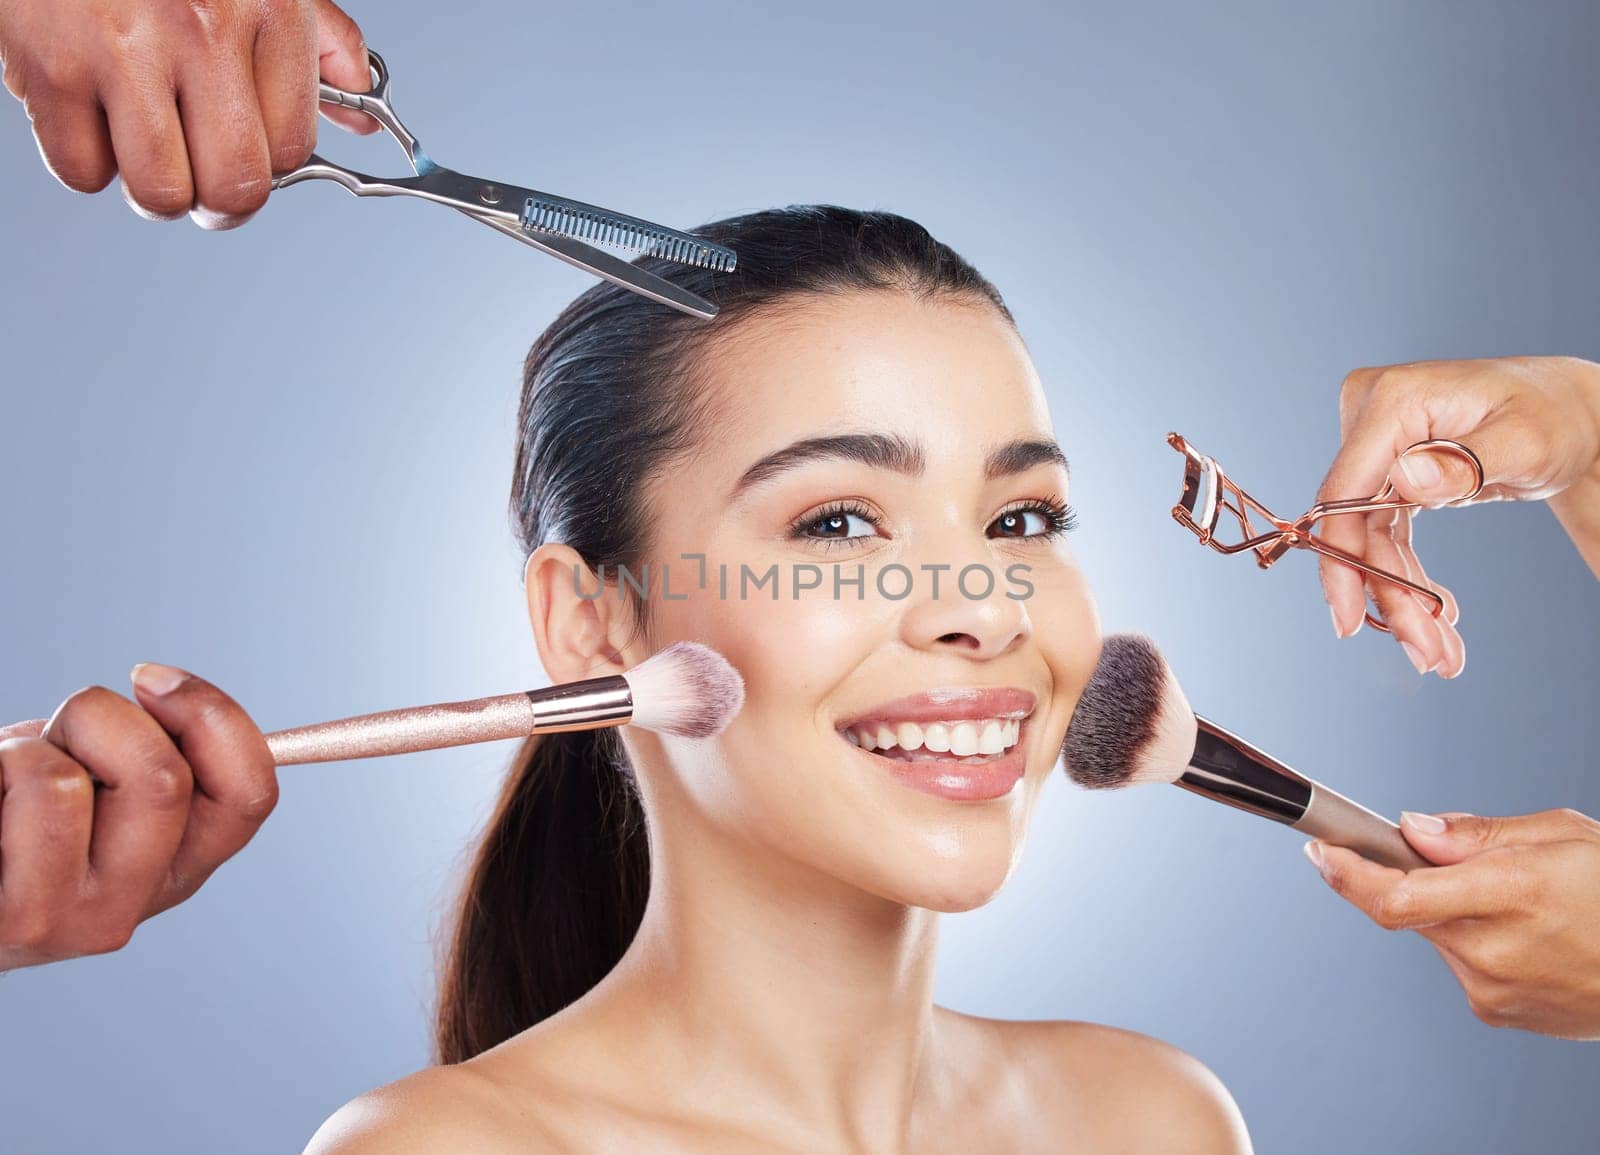 Hands with brush, makeup and portrait of woman in studio for wellness, beauty and cosmetics on blue background. Cosmetology, salon and face of girl for cosmetic application, foundation and products.